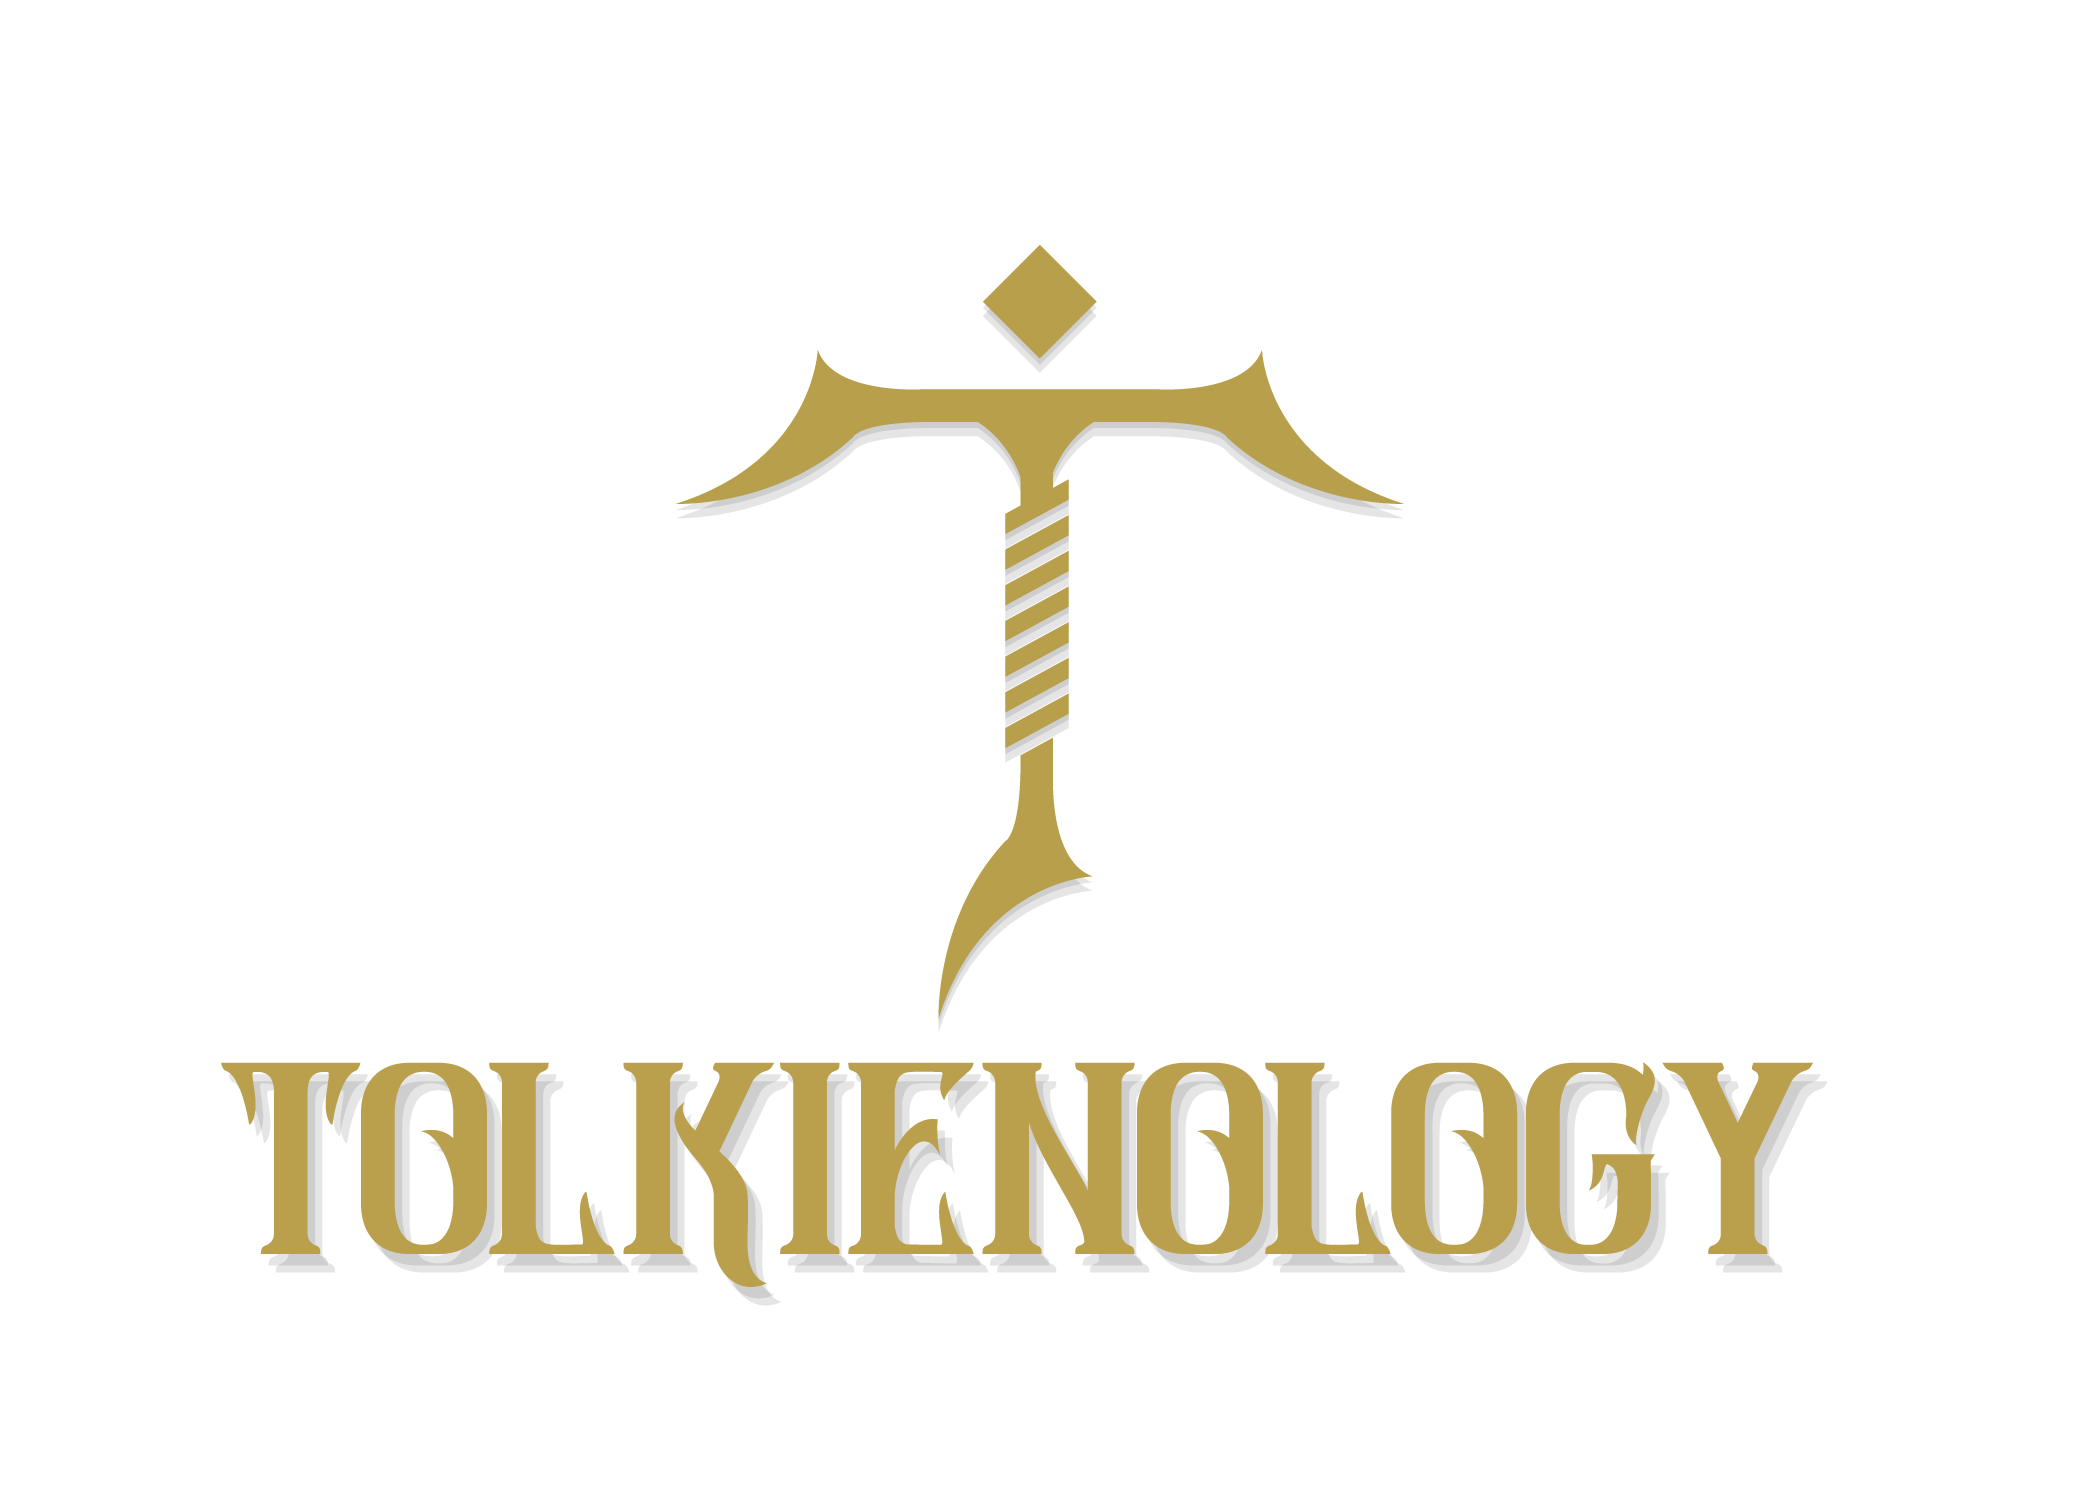 Beasts of Middle-earth - Tolkienology